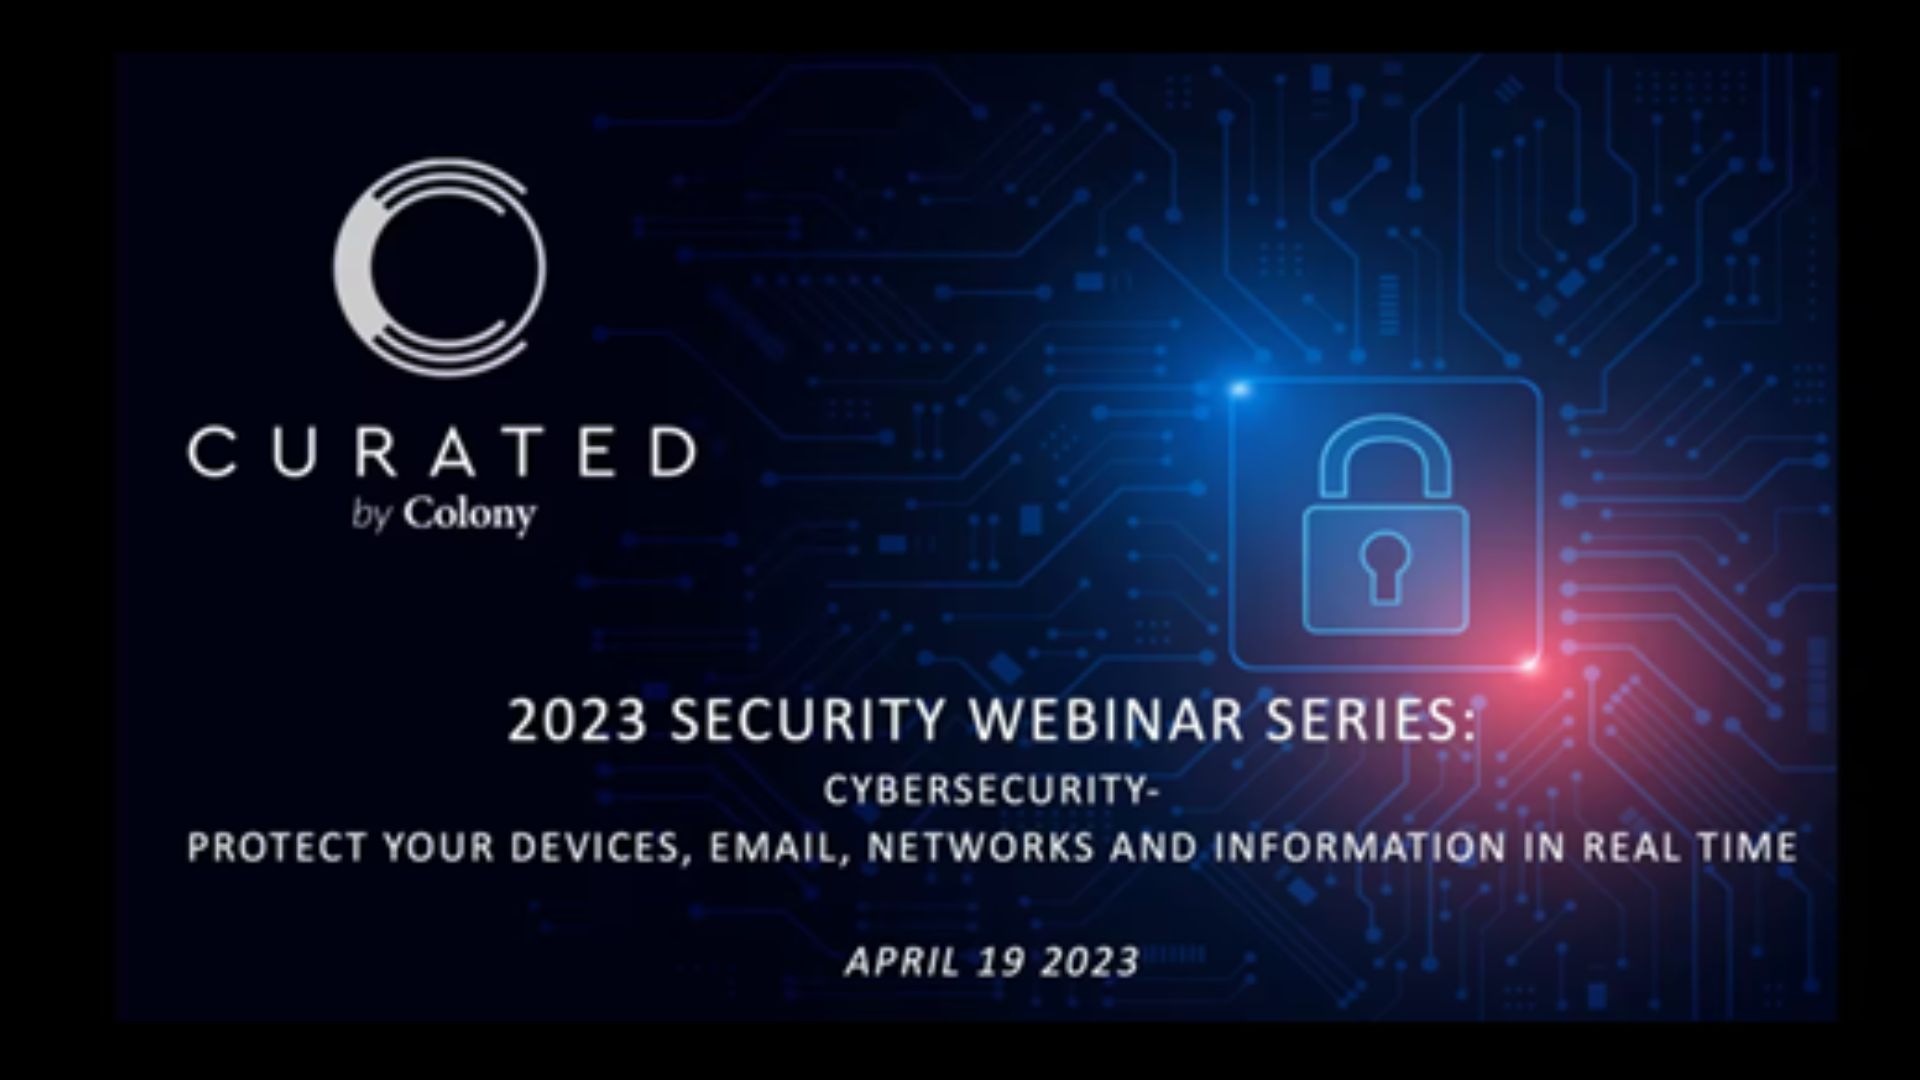 Curated By Colony Presents 2023 Security Webinar Series